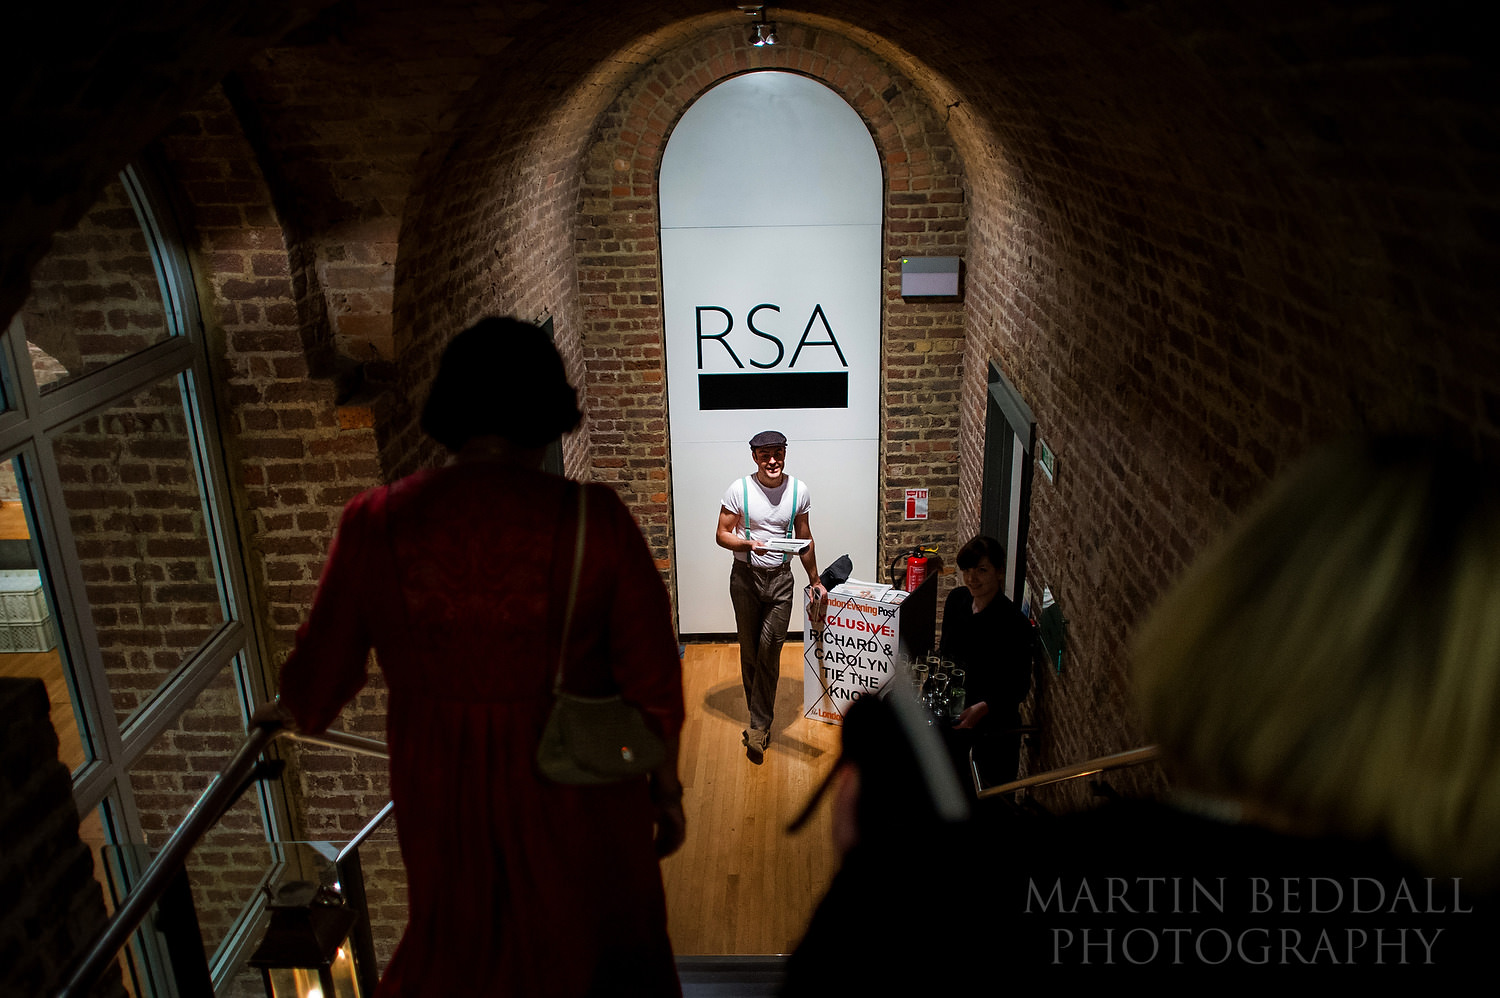 Newspaper seller at The RSA